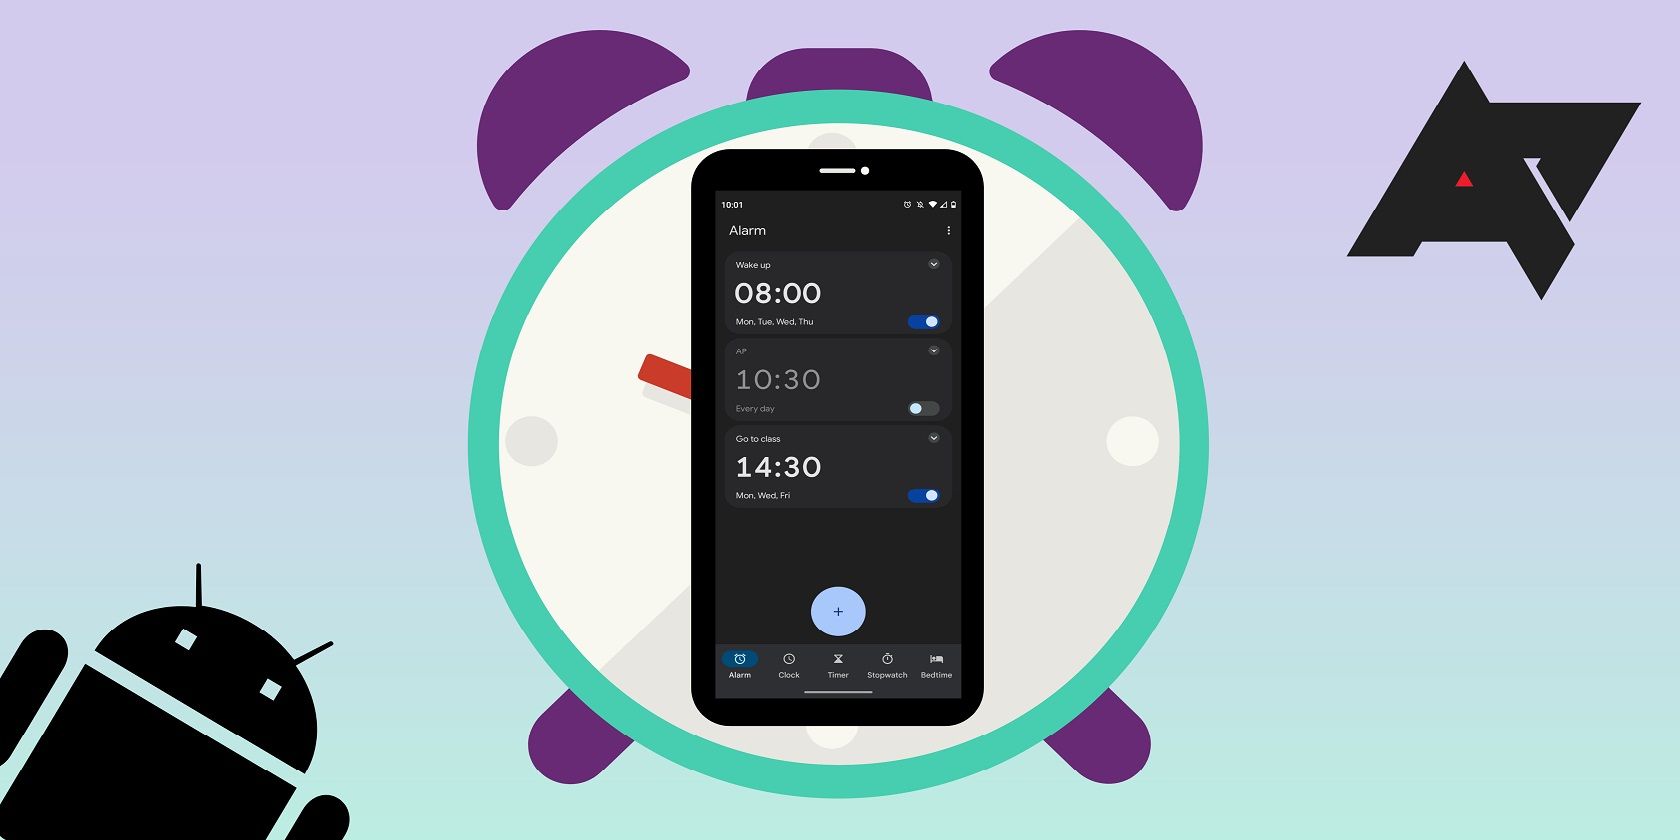 Image shows a phone screen displaying alarms on top of an alarm clock design as well as the Android icon and Android Police watermark.